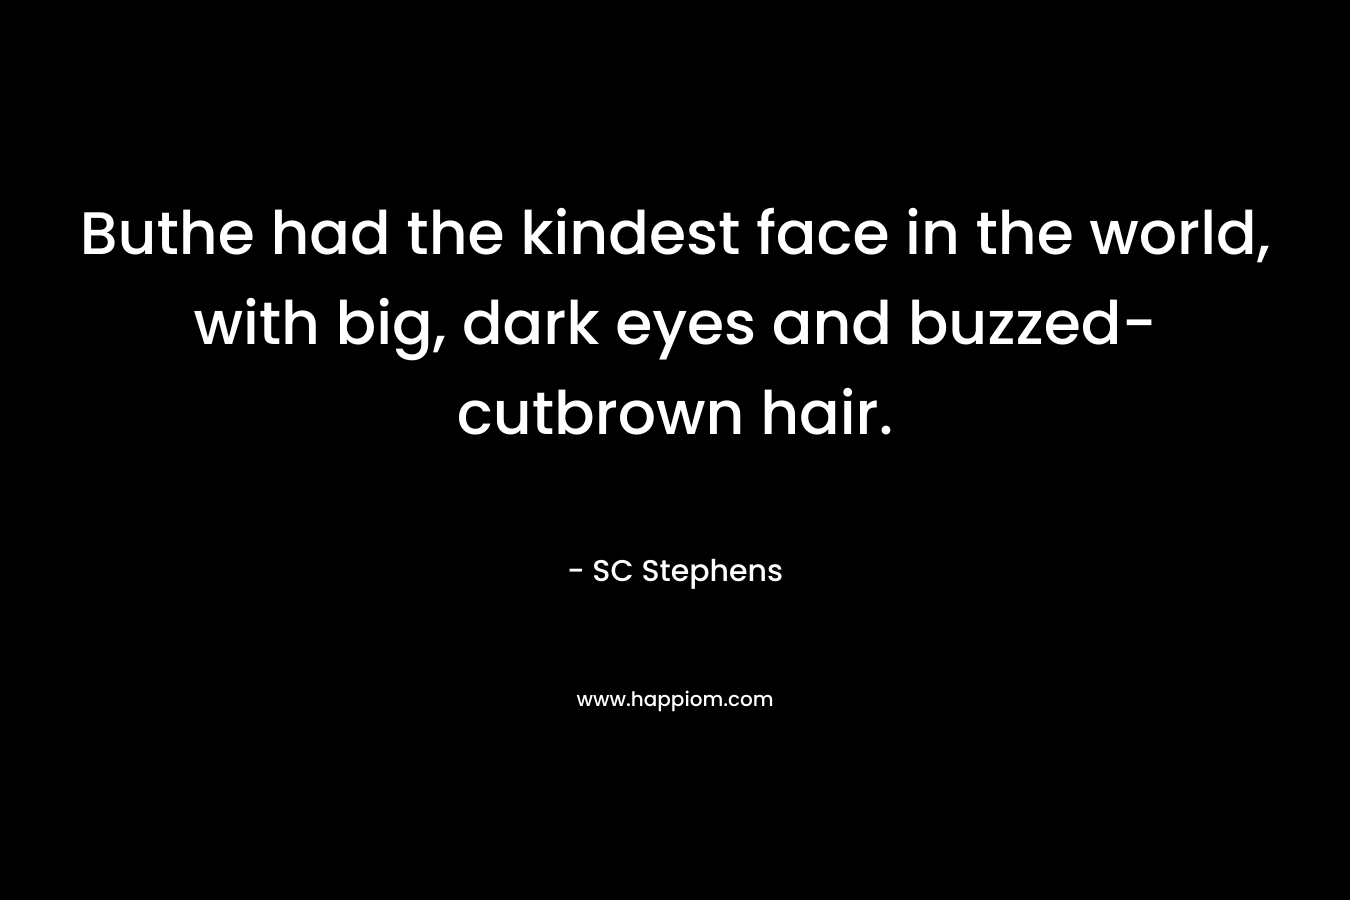 Buthe had the kindest face in the world, with big, dark eyes and buzzed-cutbrown hair. – SC Stephens